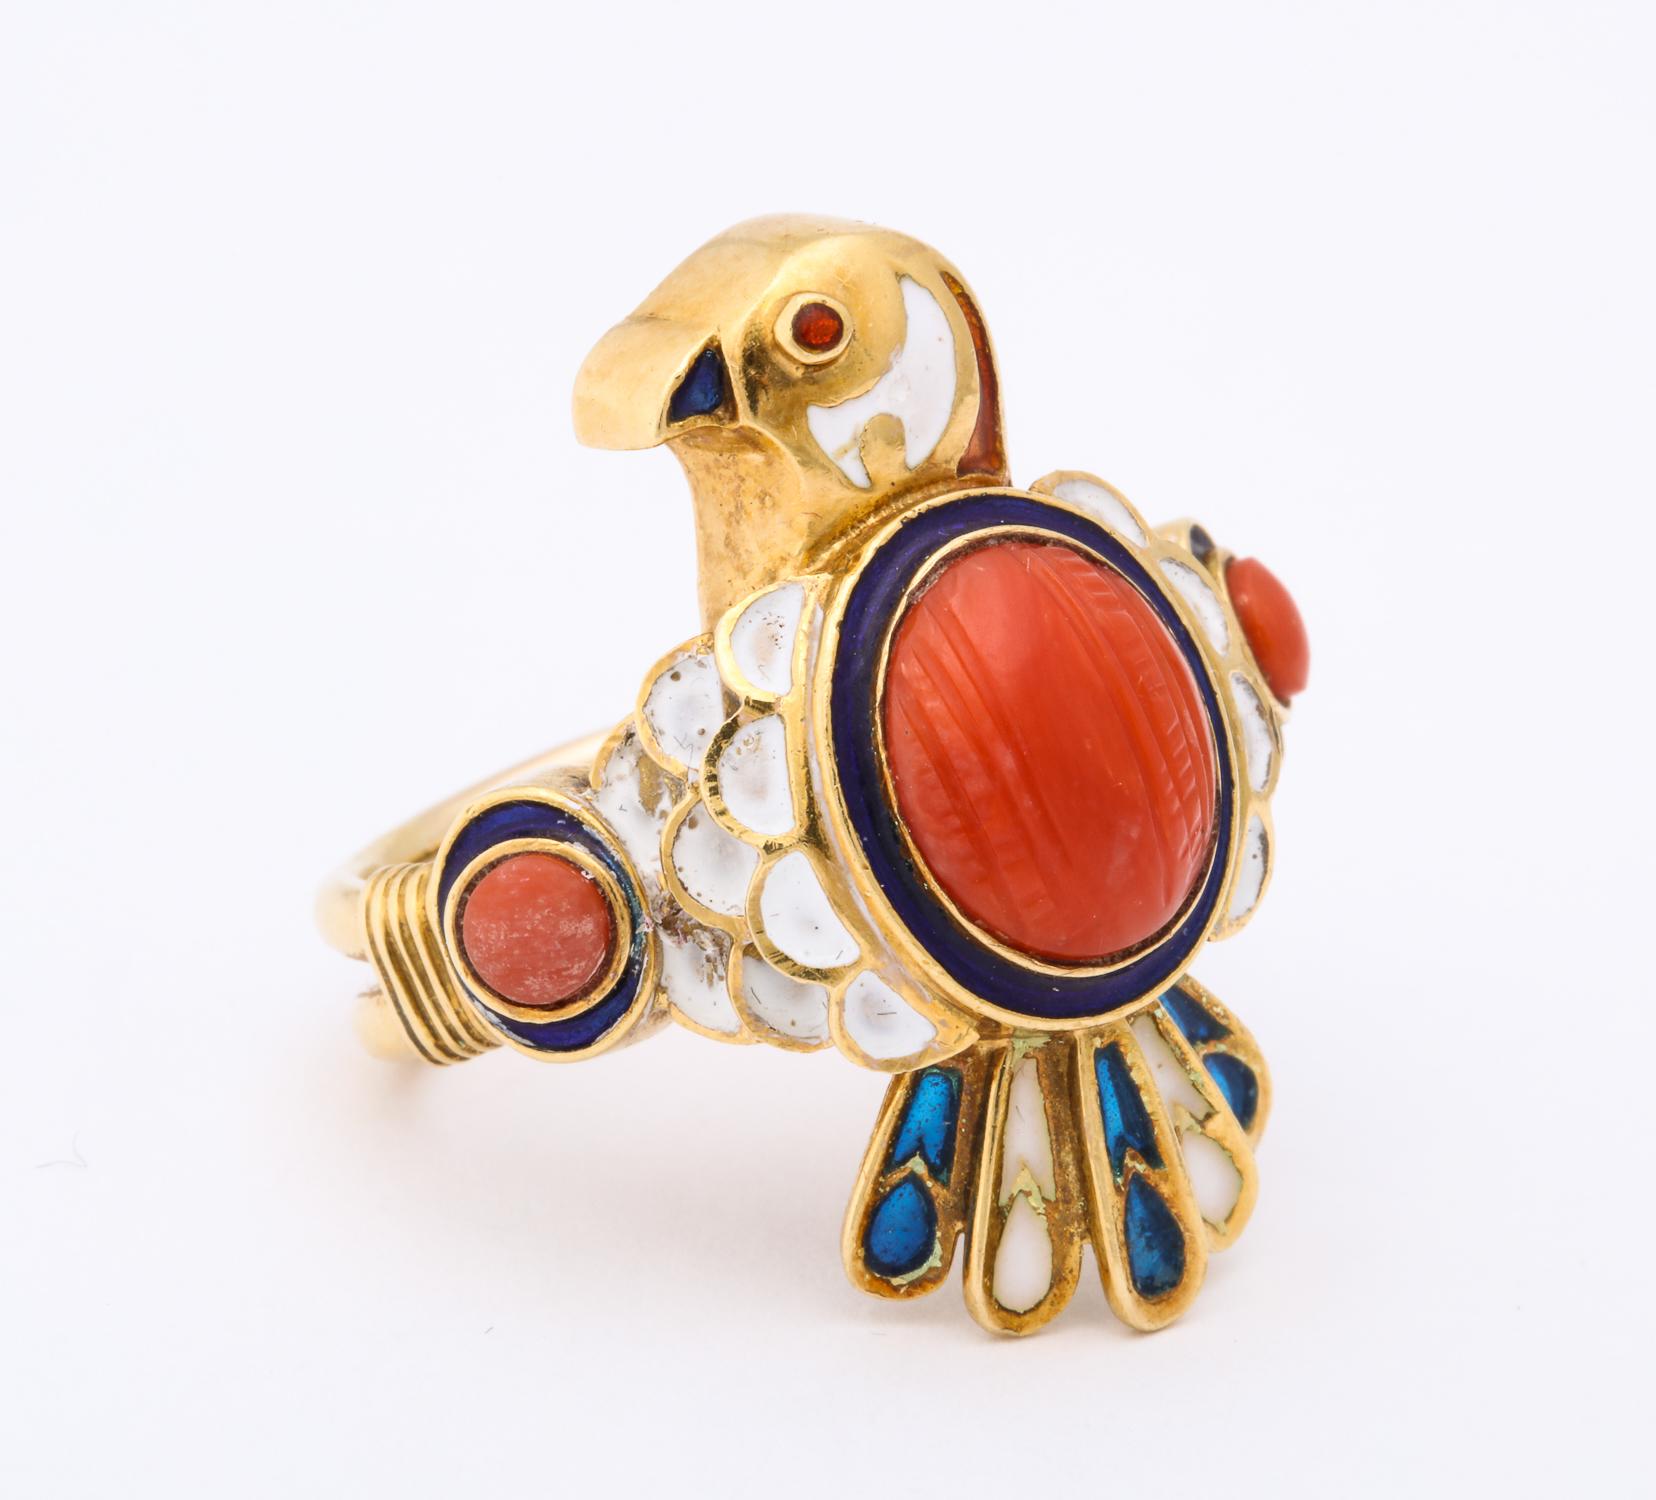 One Ladies 14kt Yellow Gold Ring Designed With A Figural Bird Motif. Bird Is Embellished With A 13mm Carved Coral Stone. Bird Ring Is Further Designed With Blue And White Enamel And With A Cabochon Ruby For His Eye. Ring Is Further Flanked With @